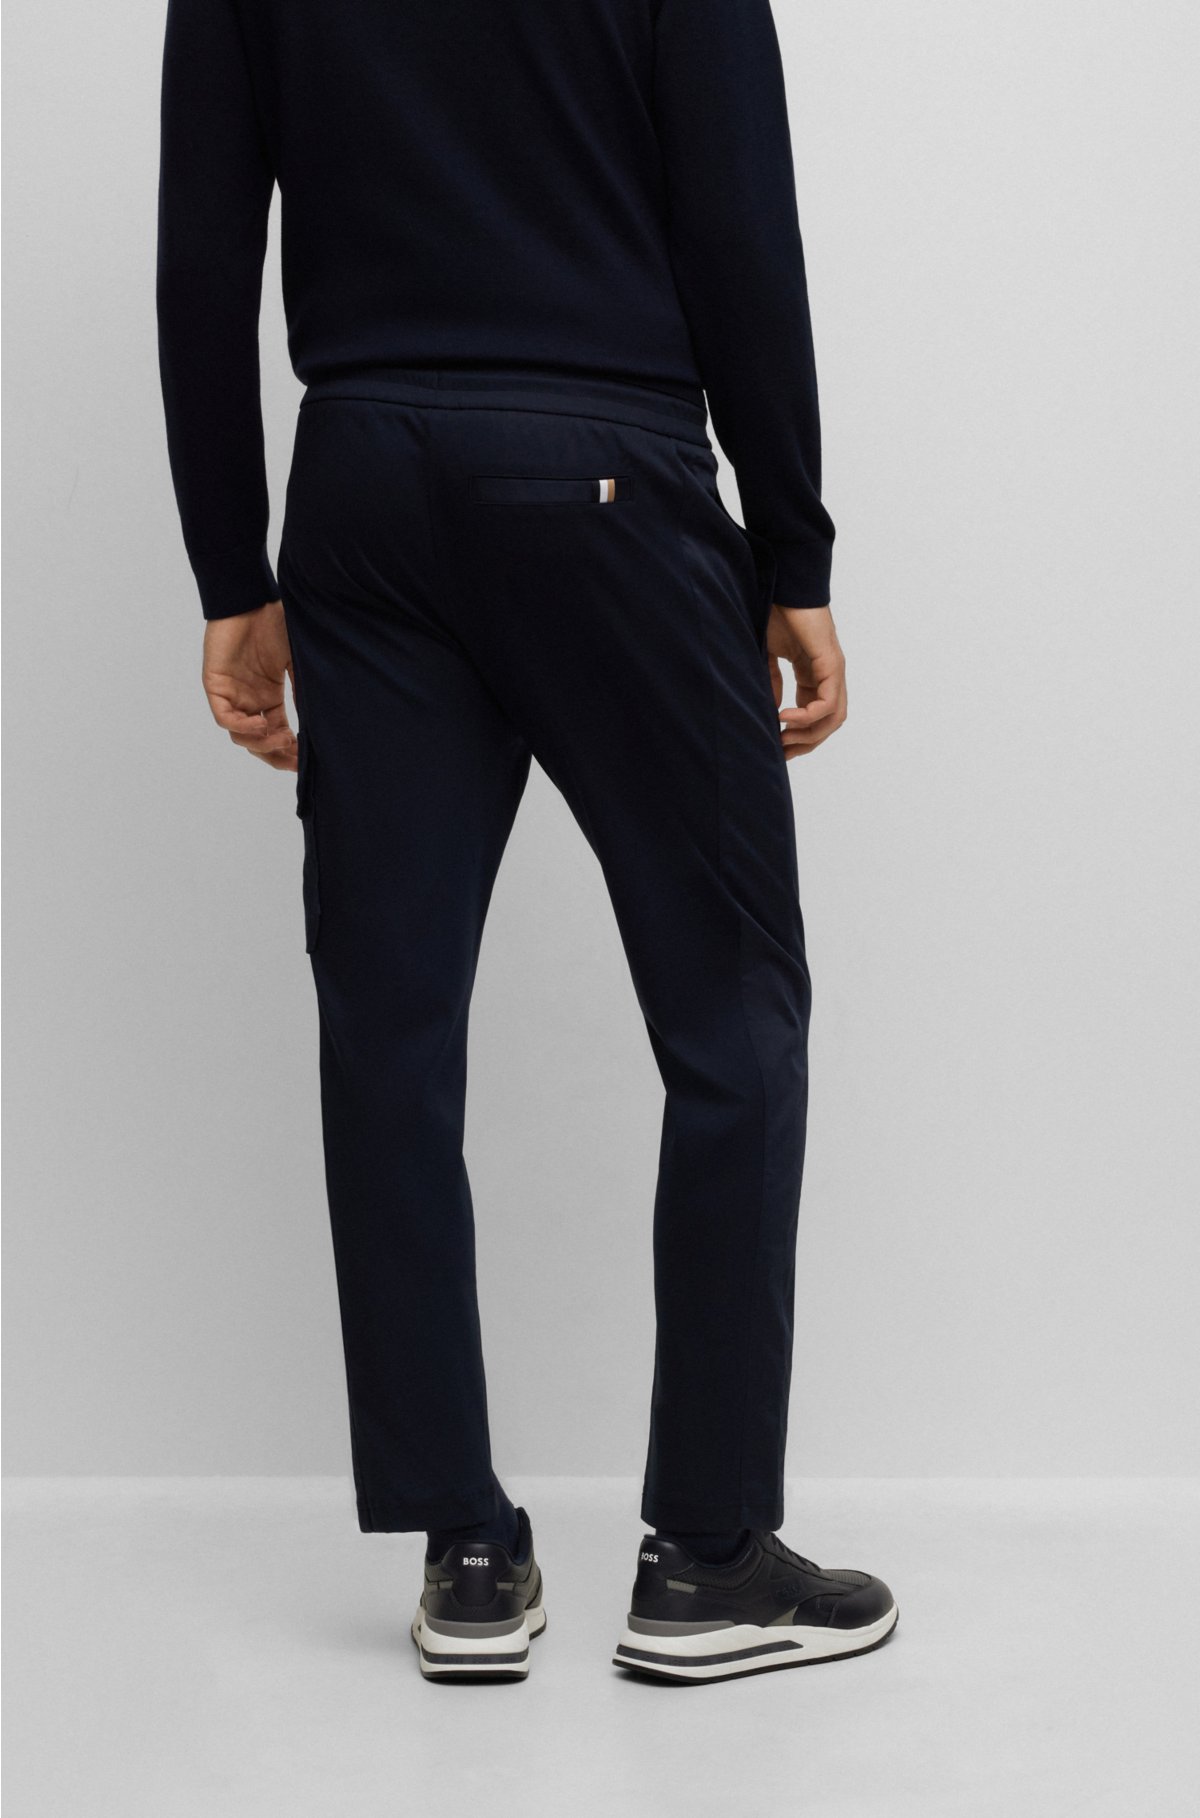 Mercerized-cotton tracksuit bottoms with insert details